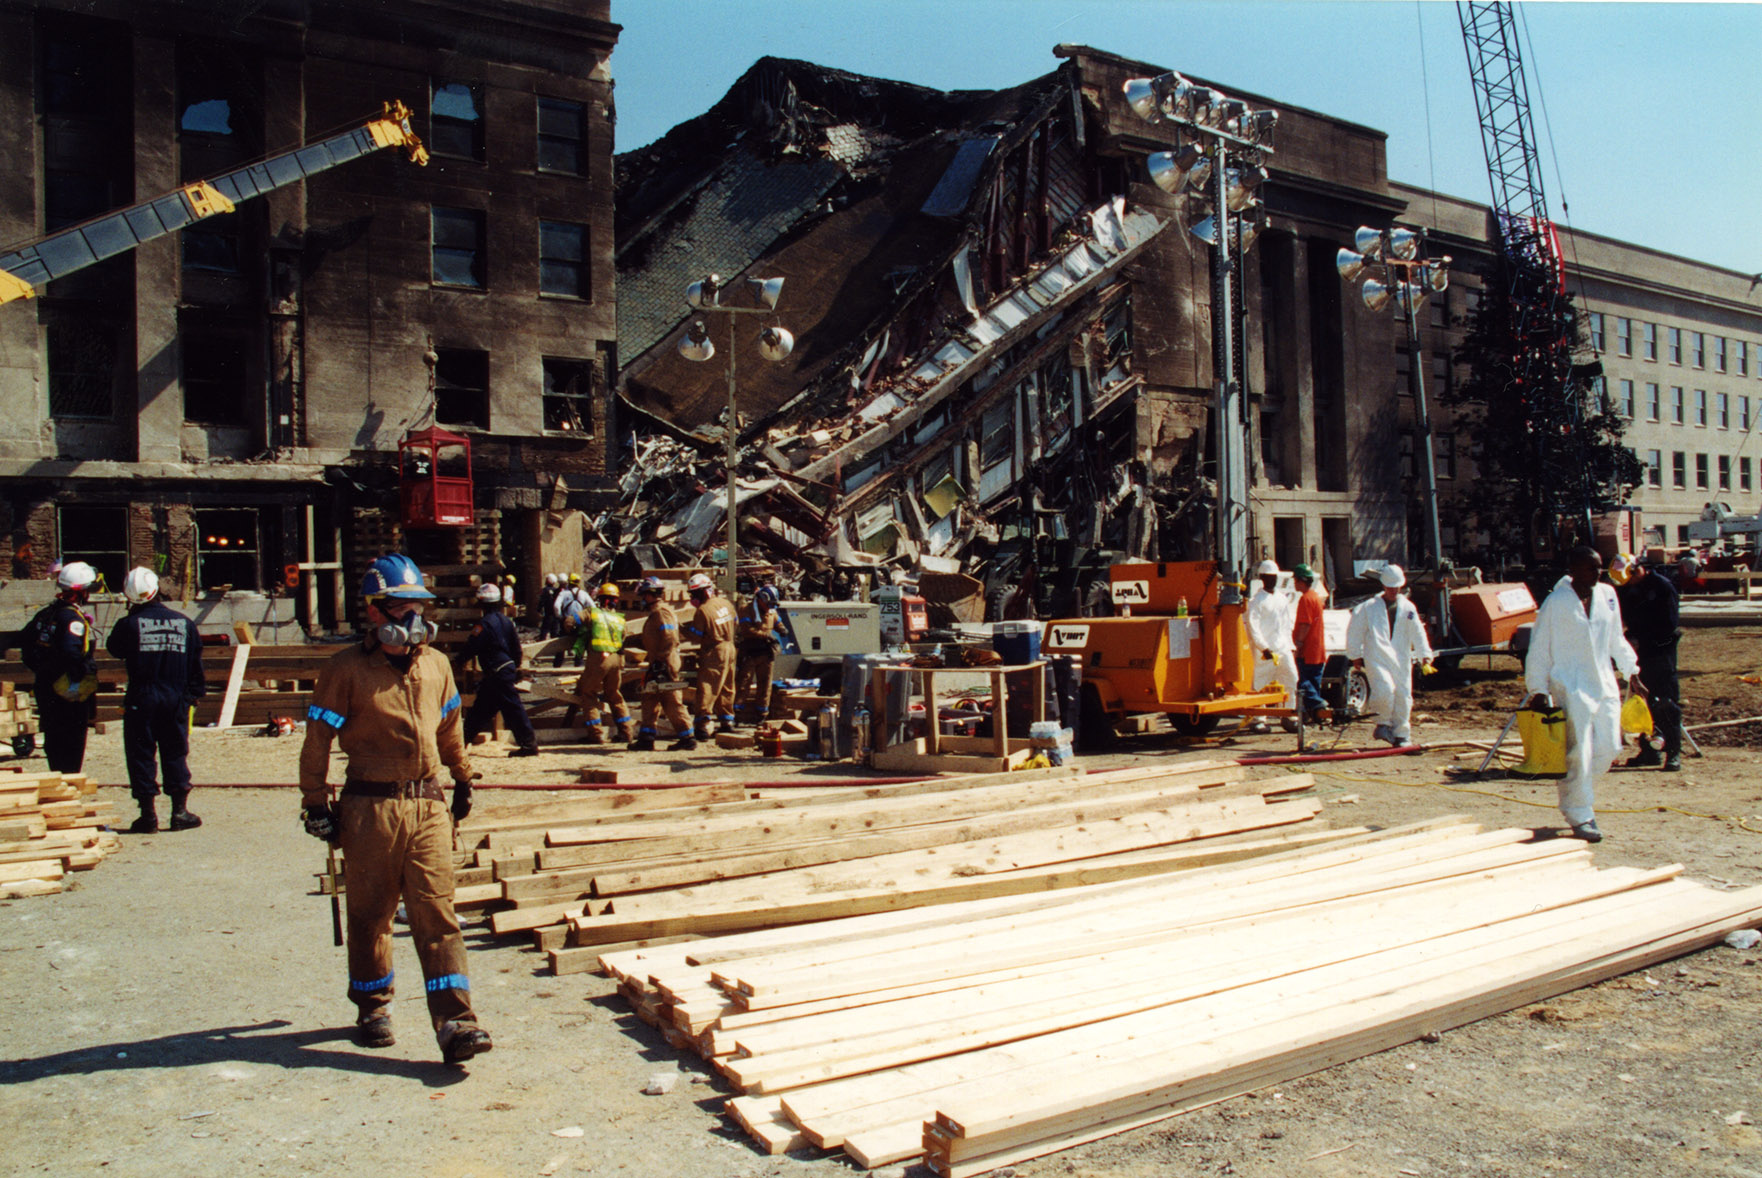 Rescue workers near a collapsed section of building